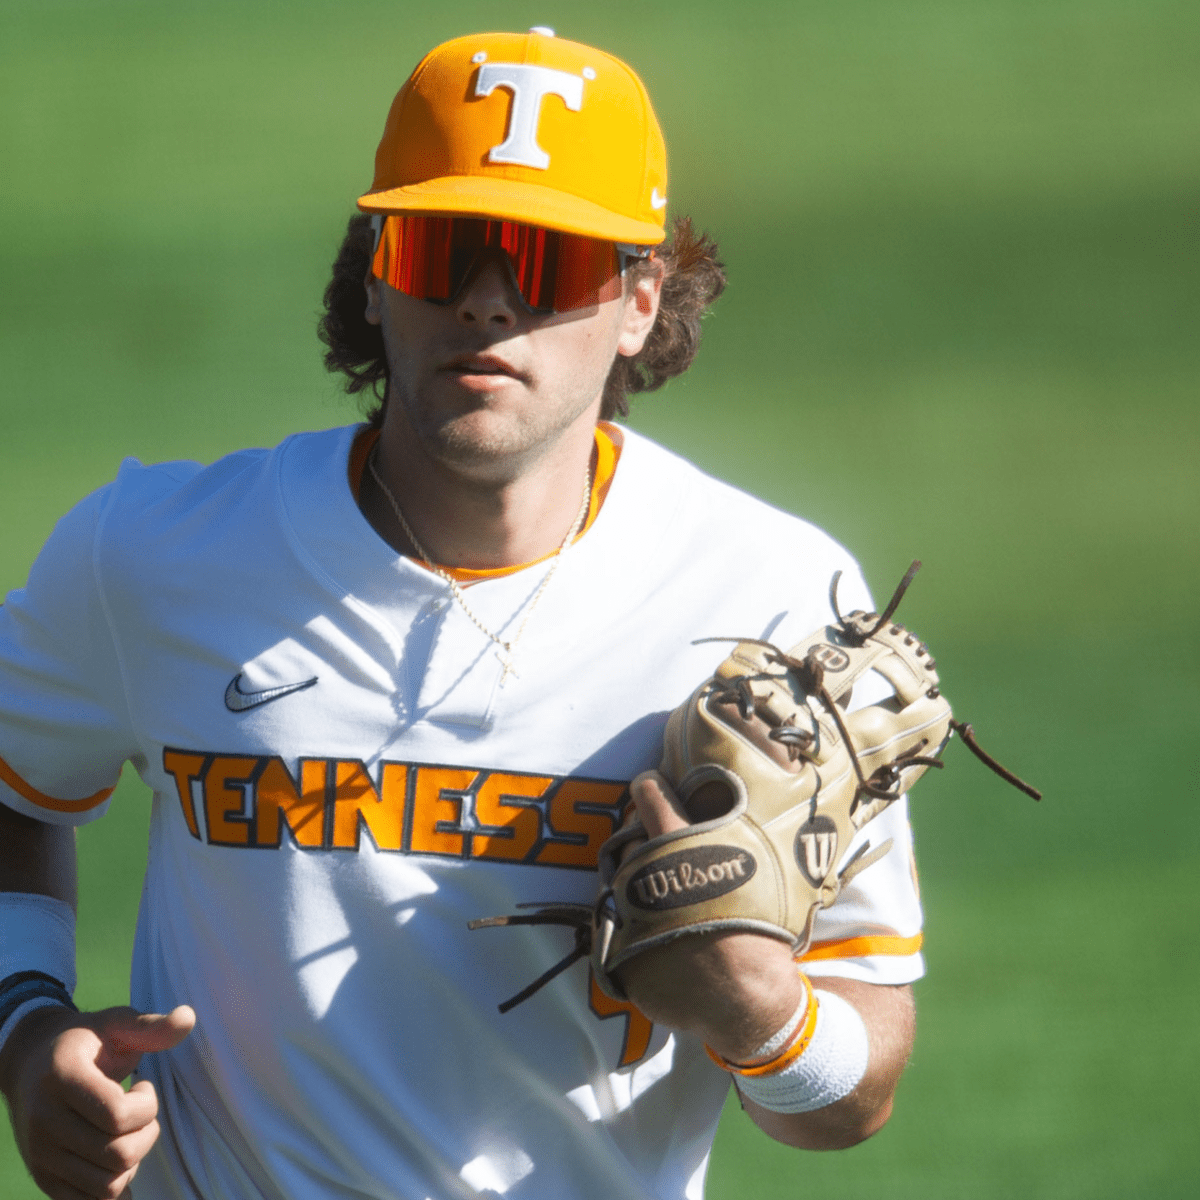 Tennessee baseball and its fan base excited for the future